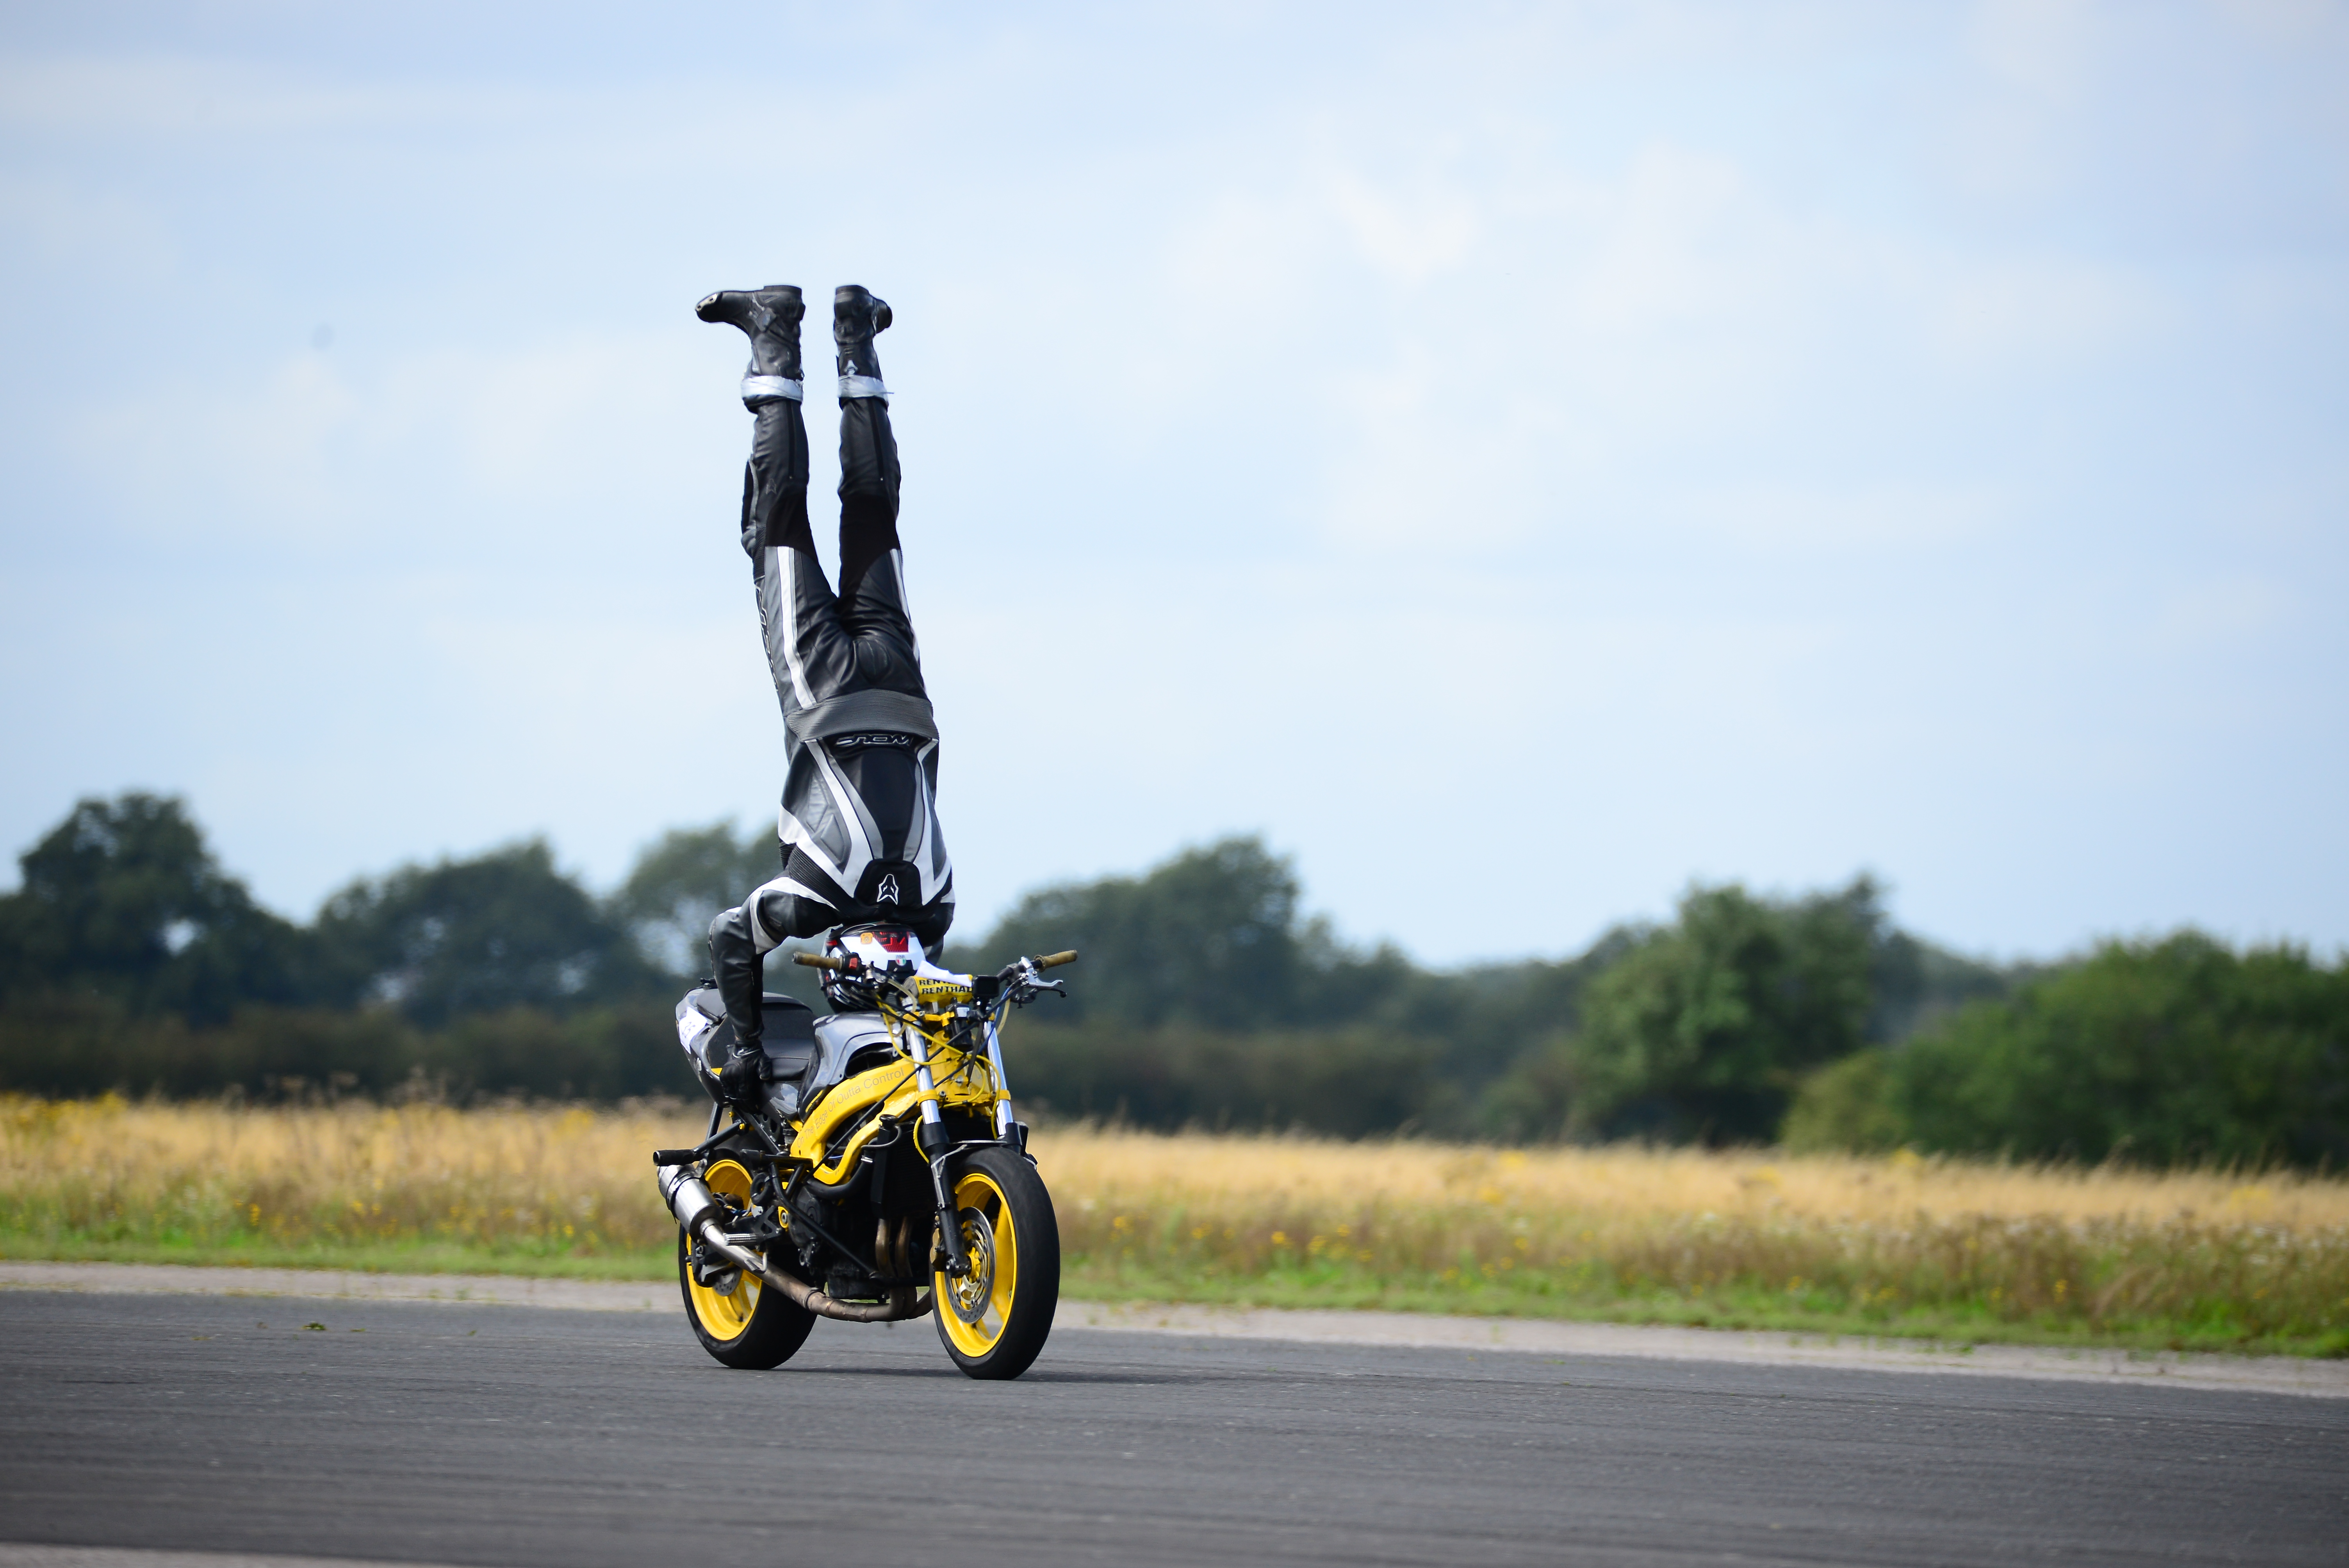 Marco George hit 76mph during his world record attempt in North Yorkshire